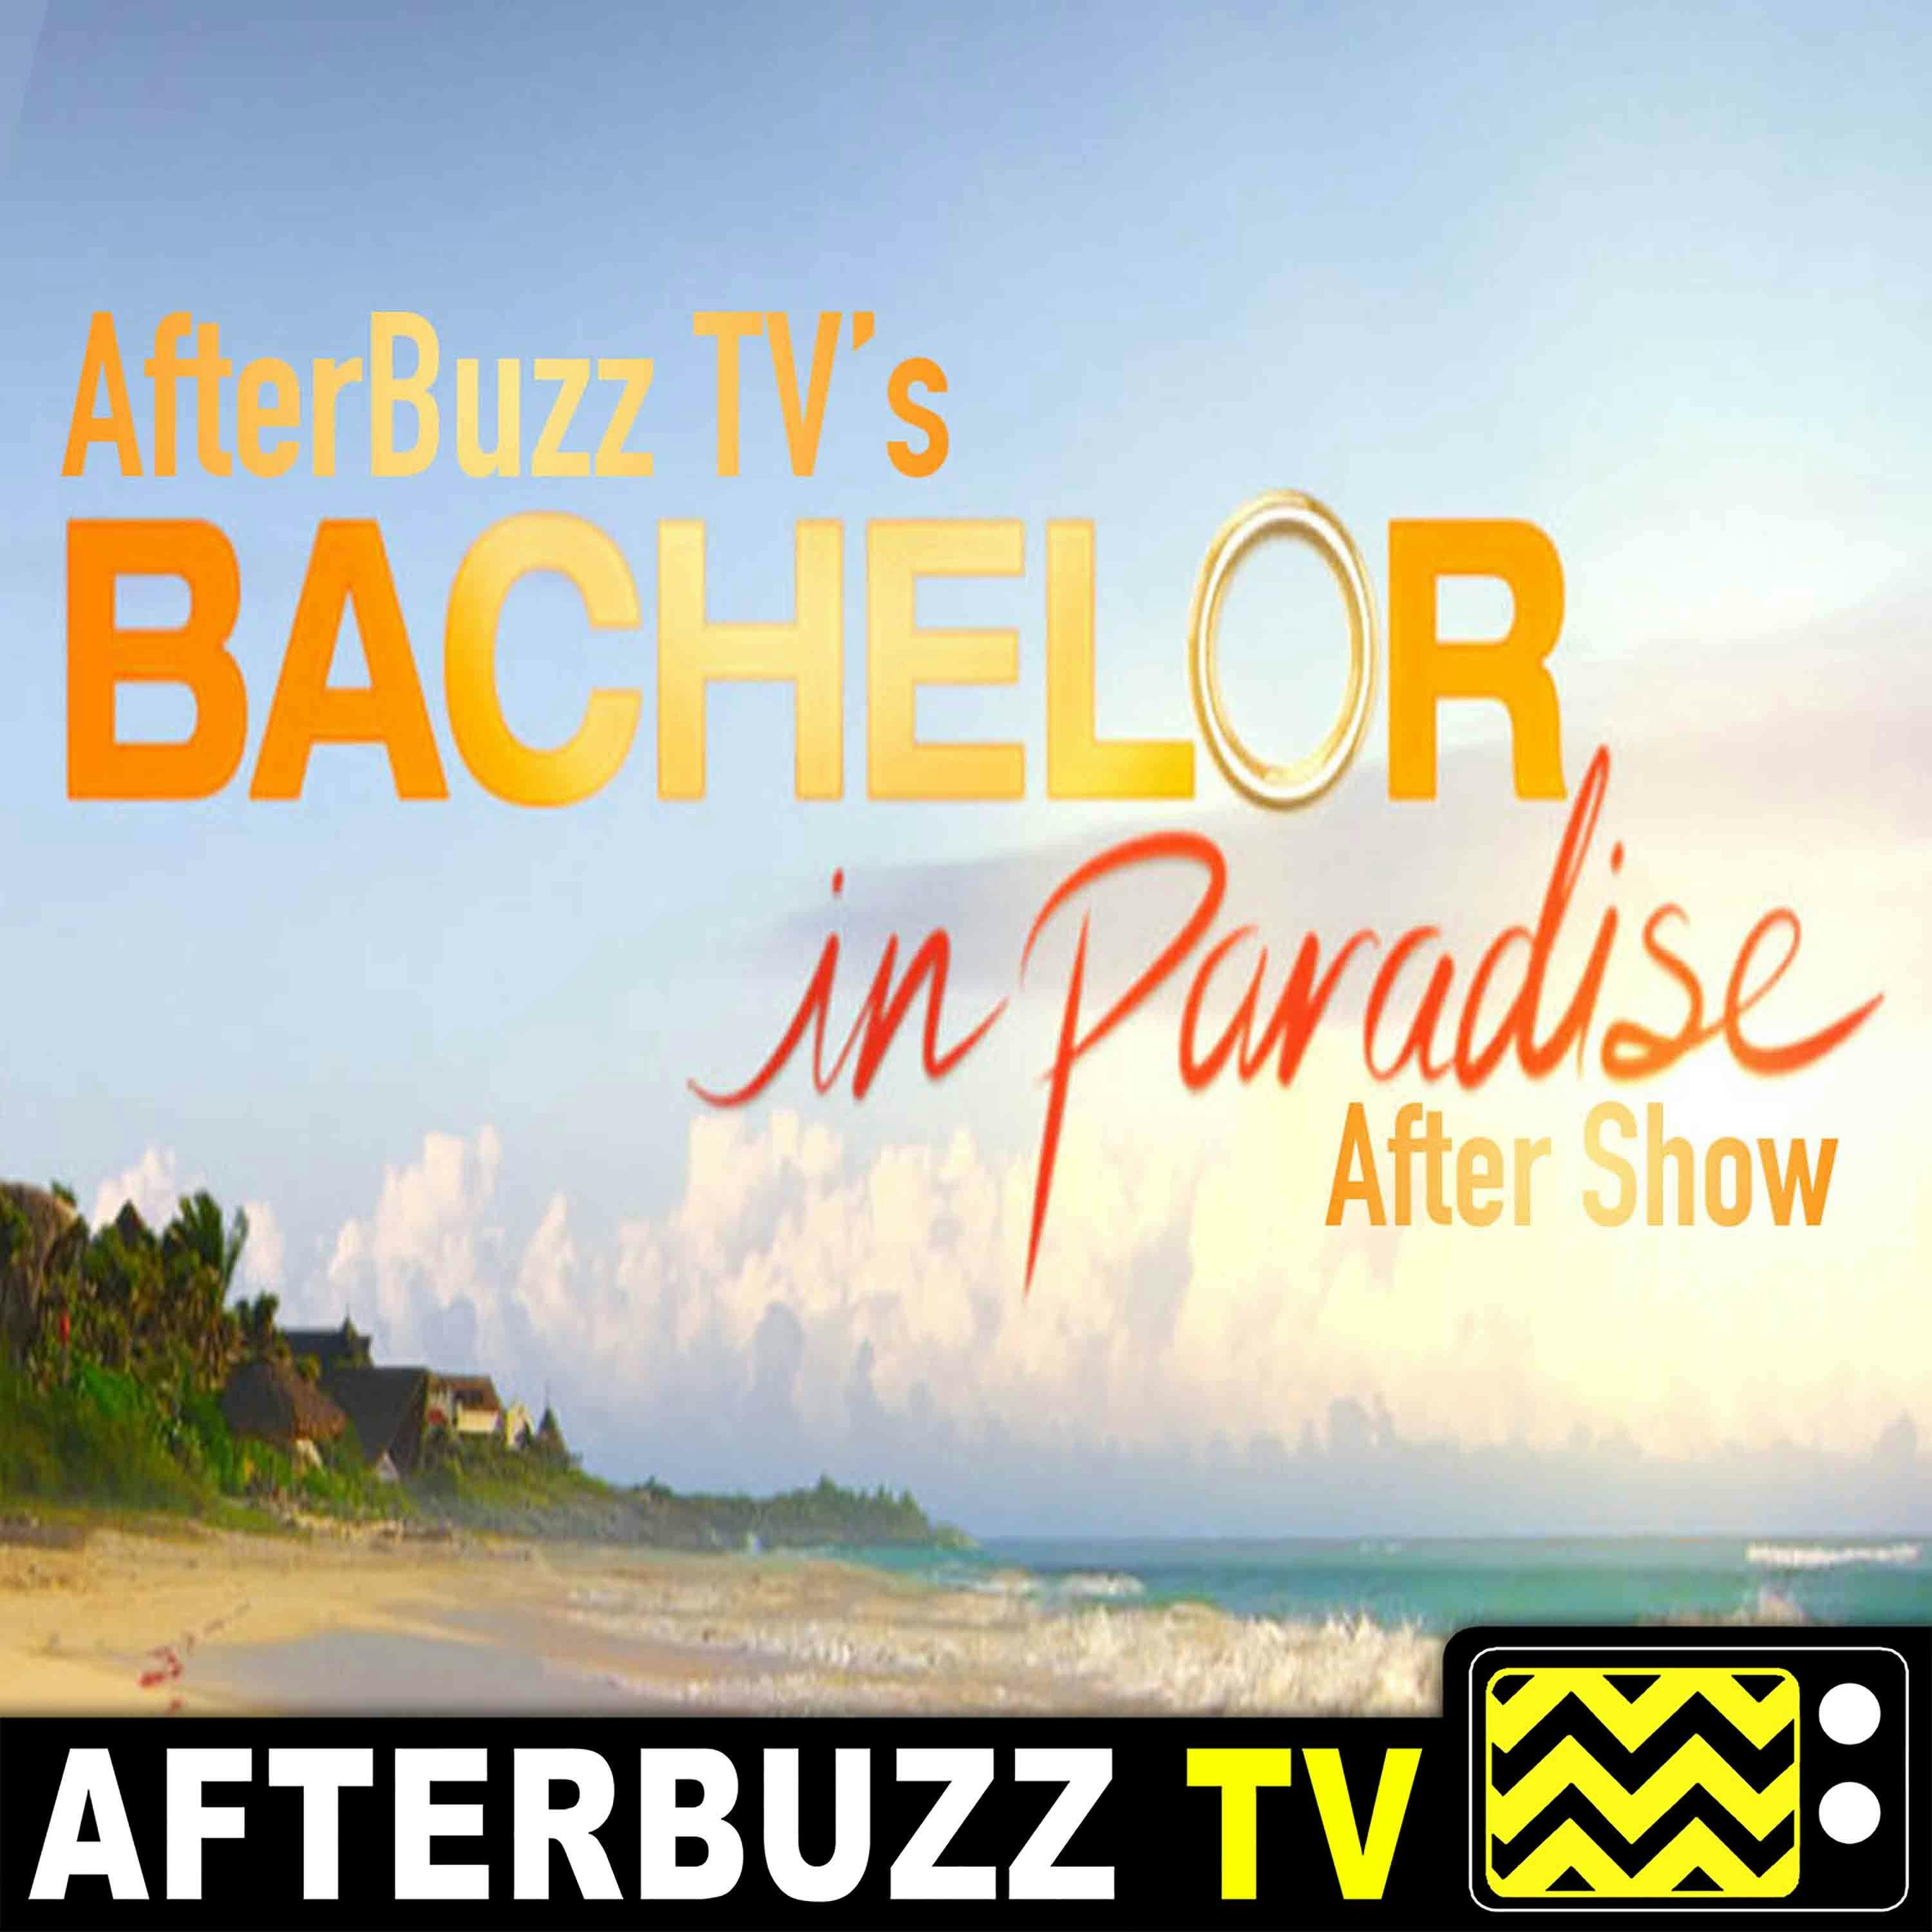 Bachelor In Paradise S:3 | Nick Viall Guests on Episodes 3 & 4 | AfterBuzz TV AfterShow